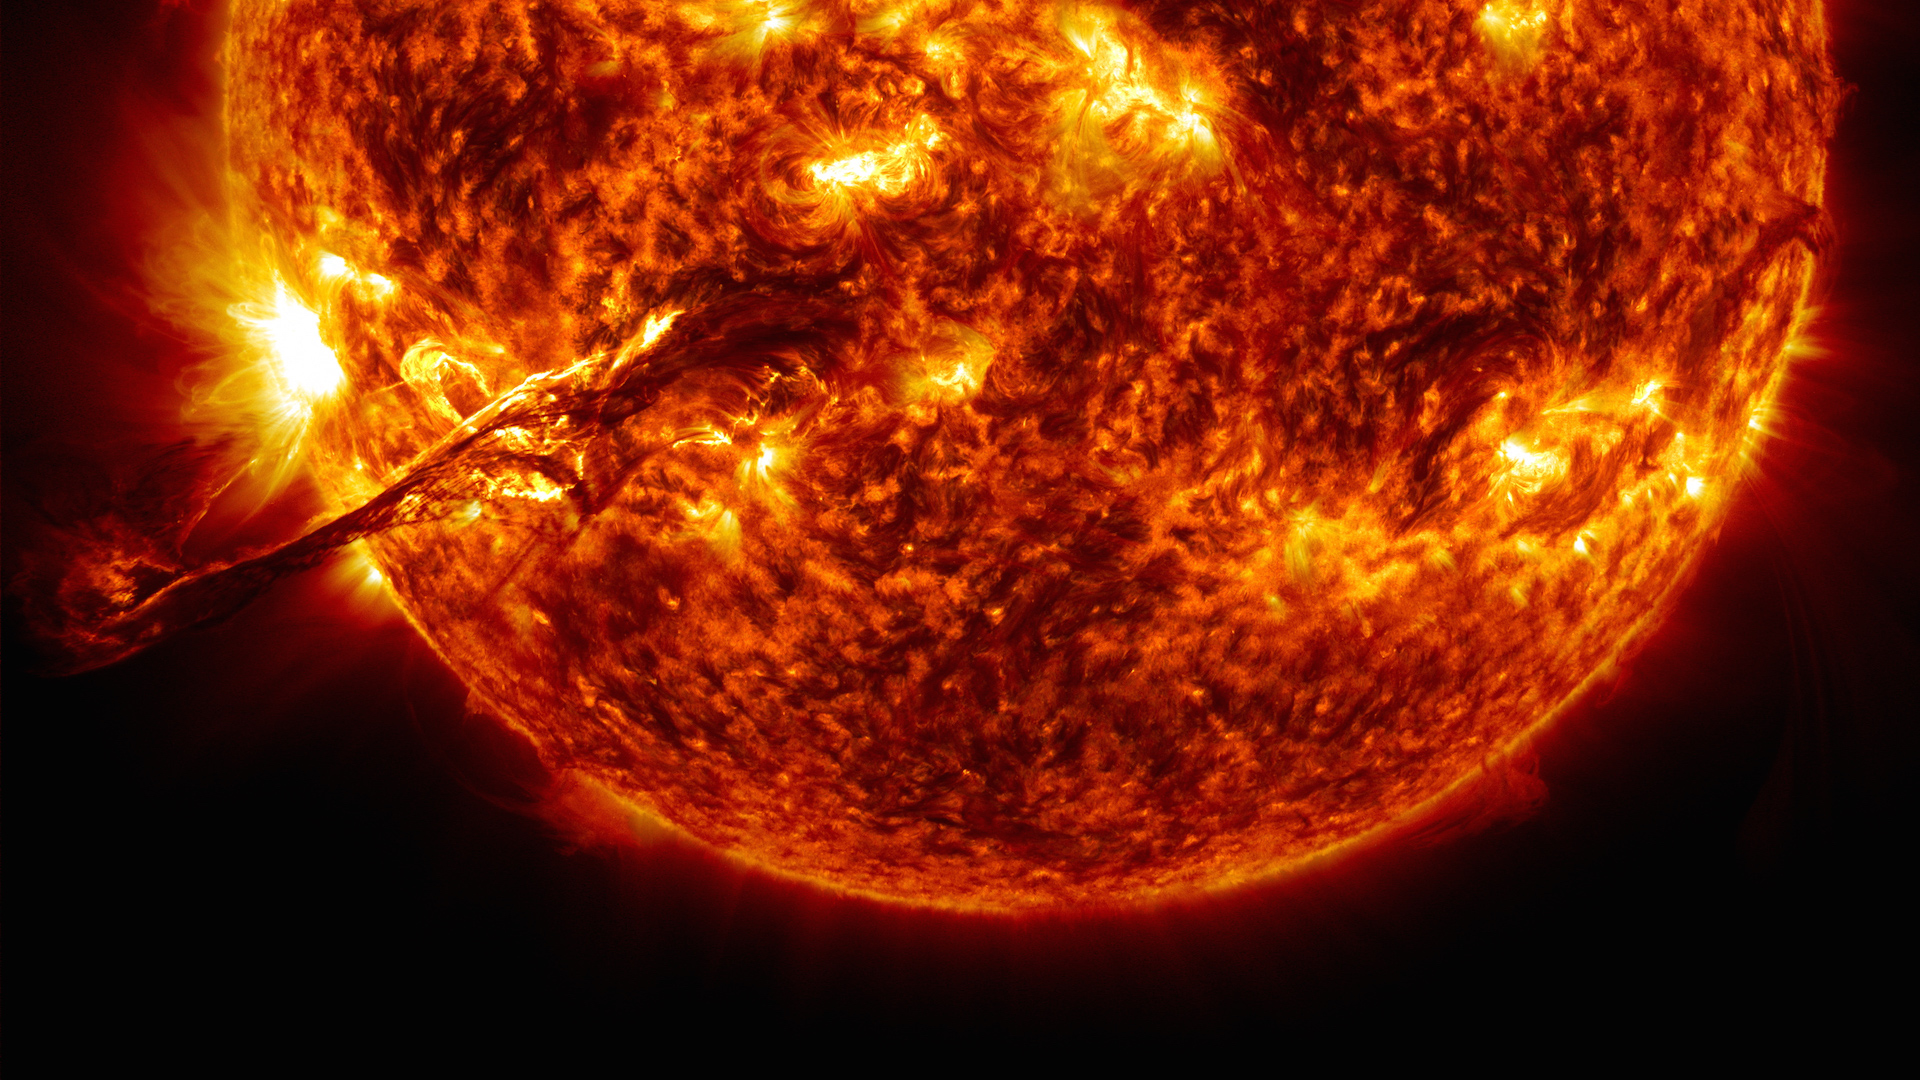 Preview Image for Thermonuclear Art: The Sun in UHD